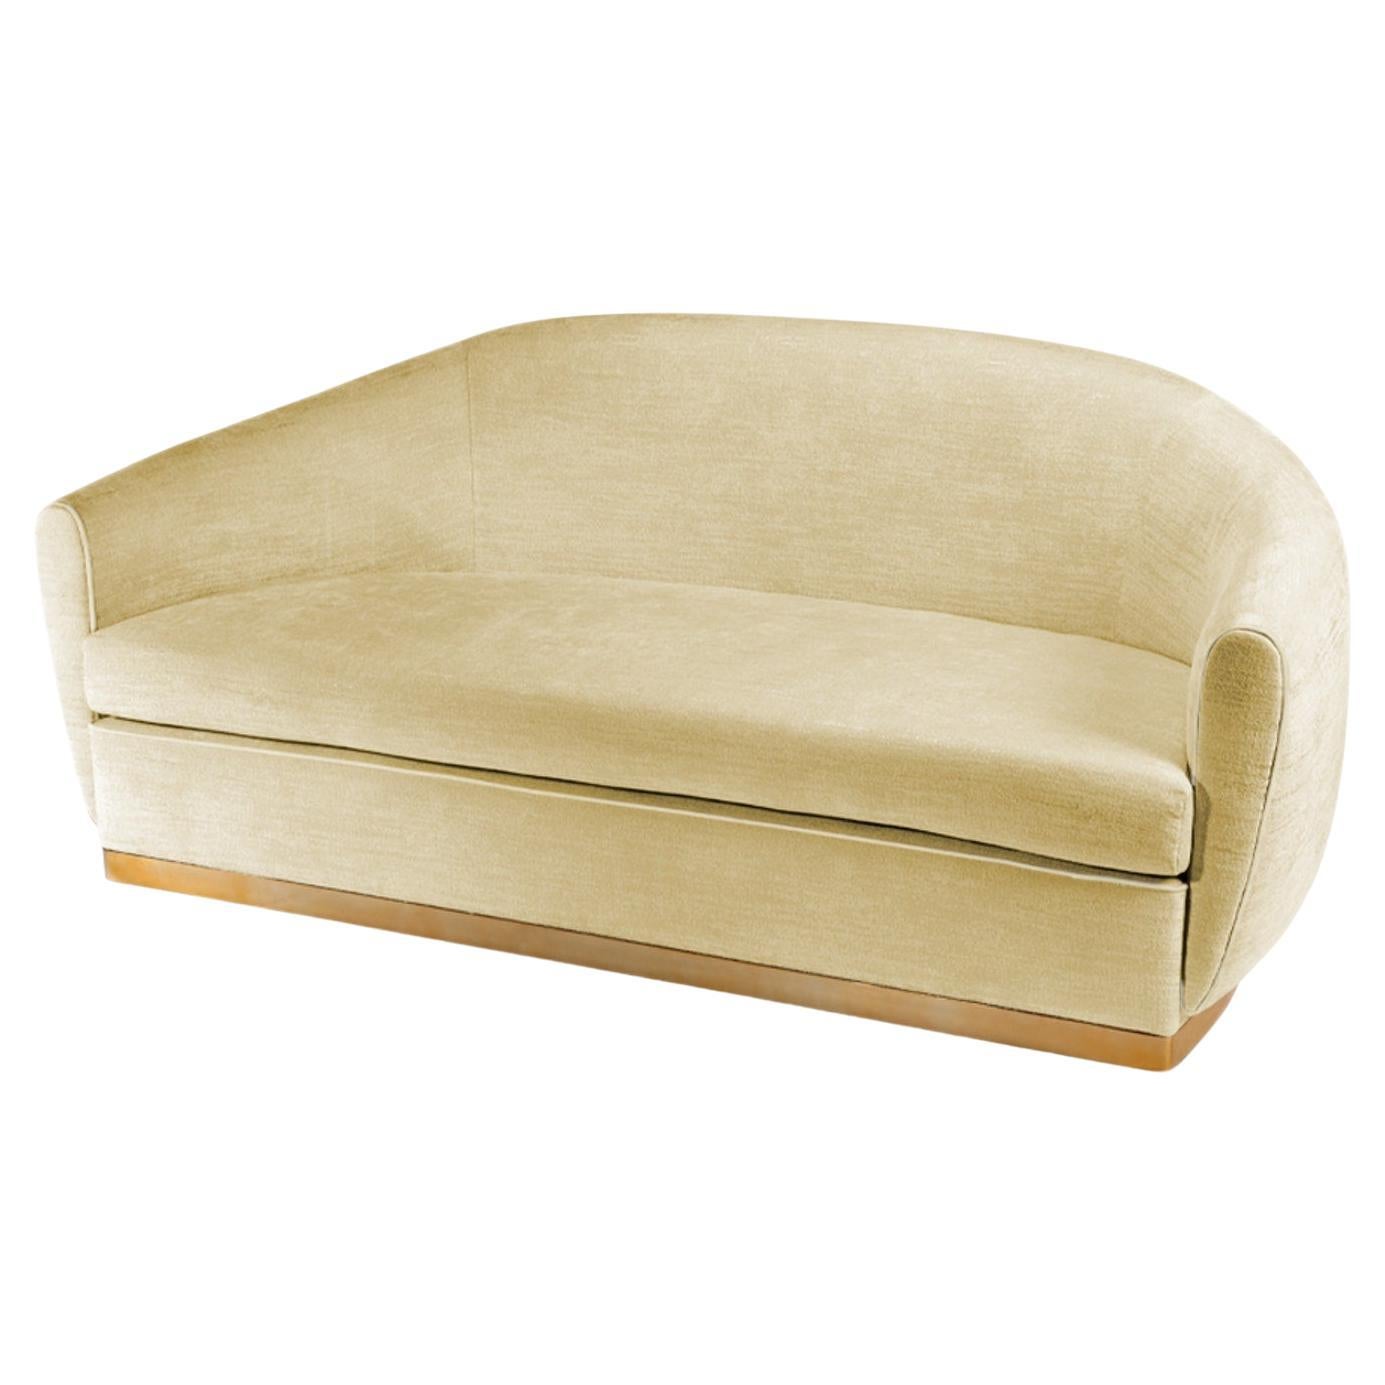 Sofa Grace 2-Seat in Yellow Marka Barket Upholstery and Polished Brass Base For Sale